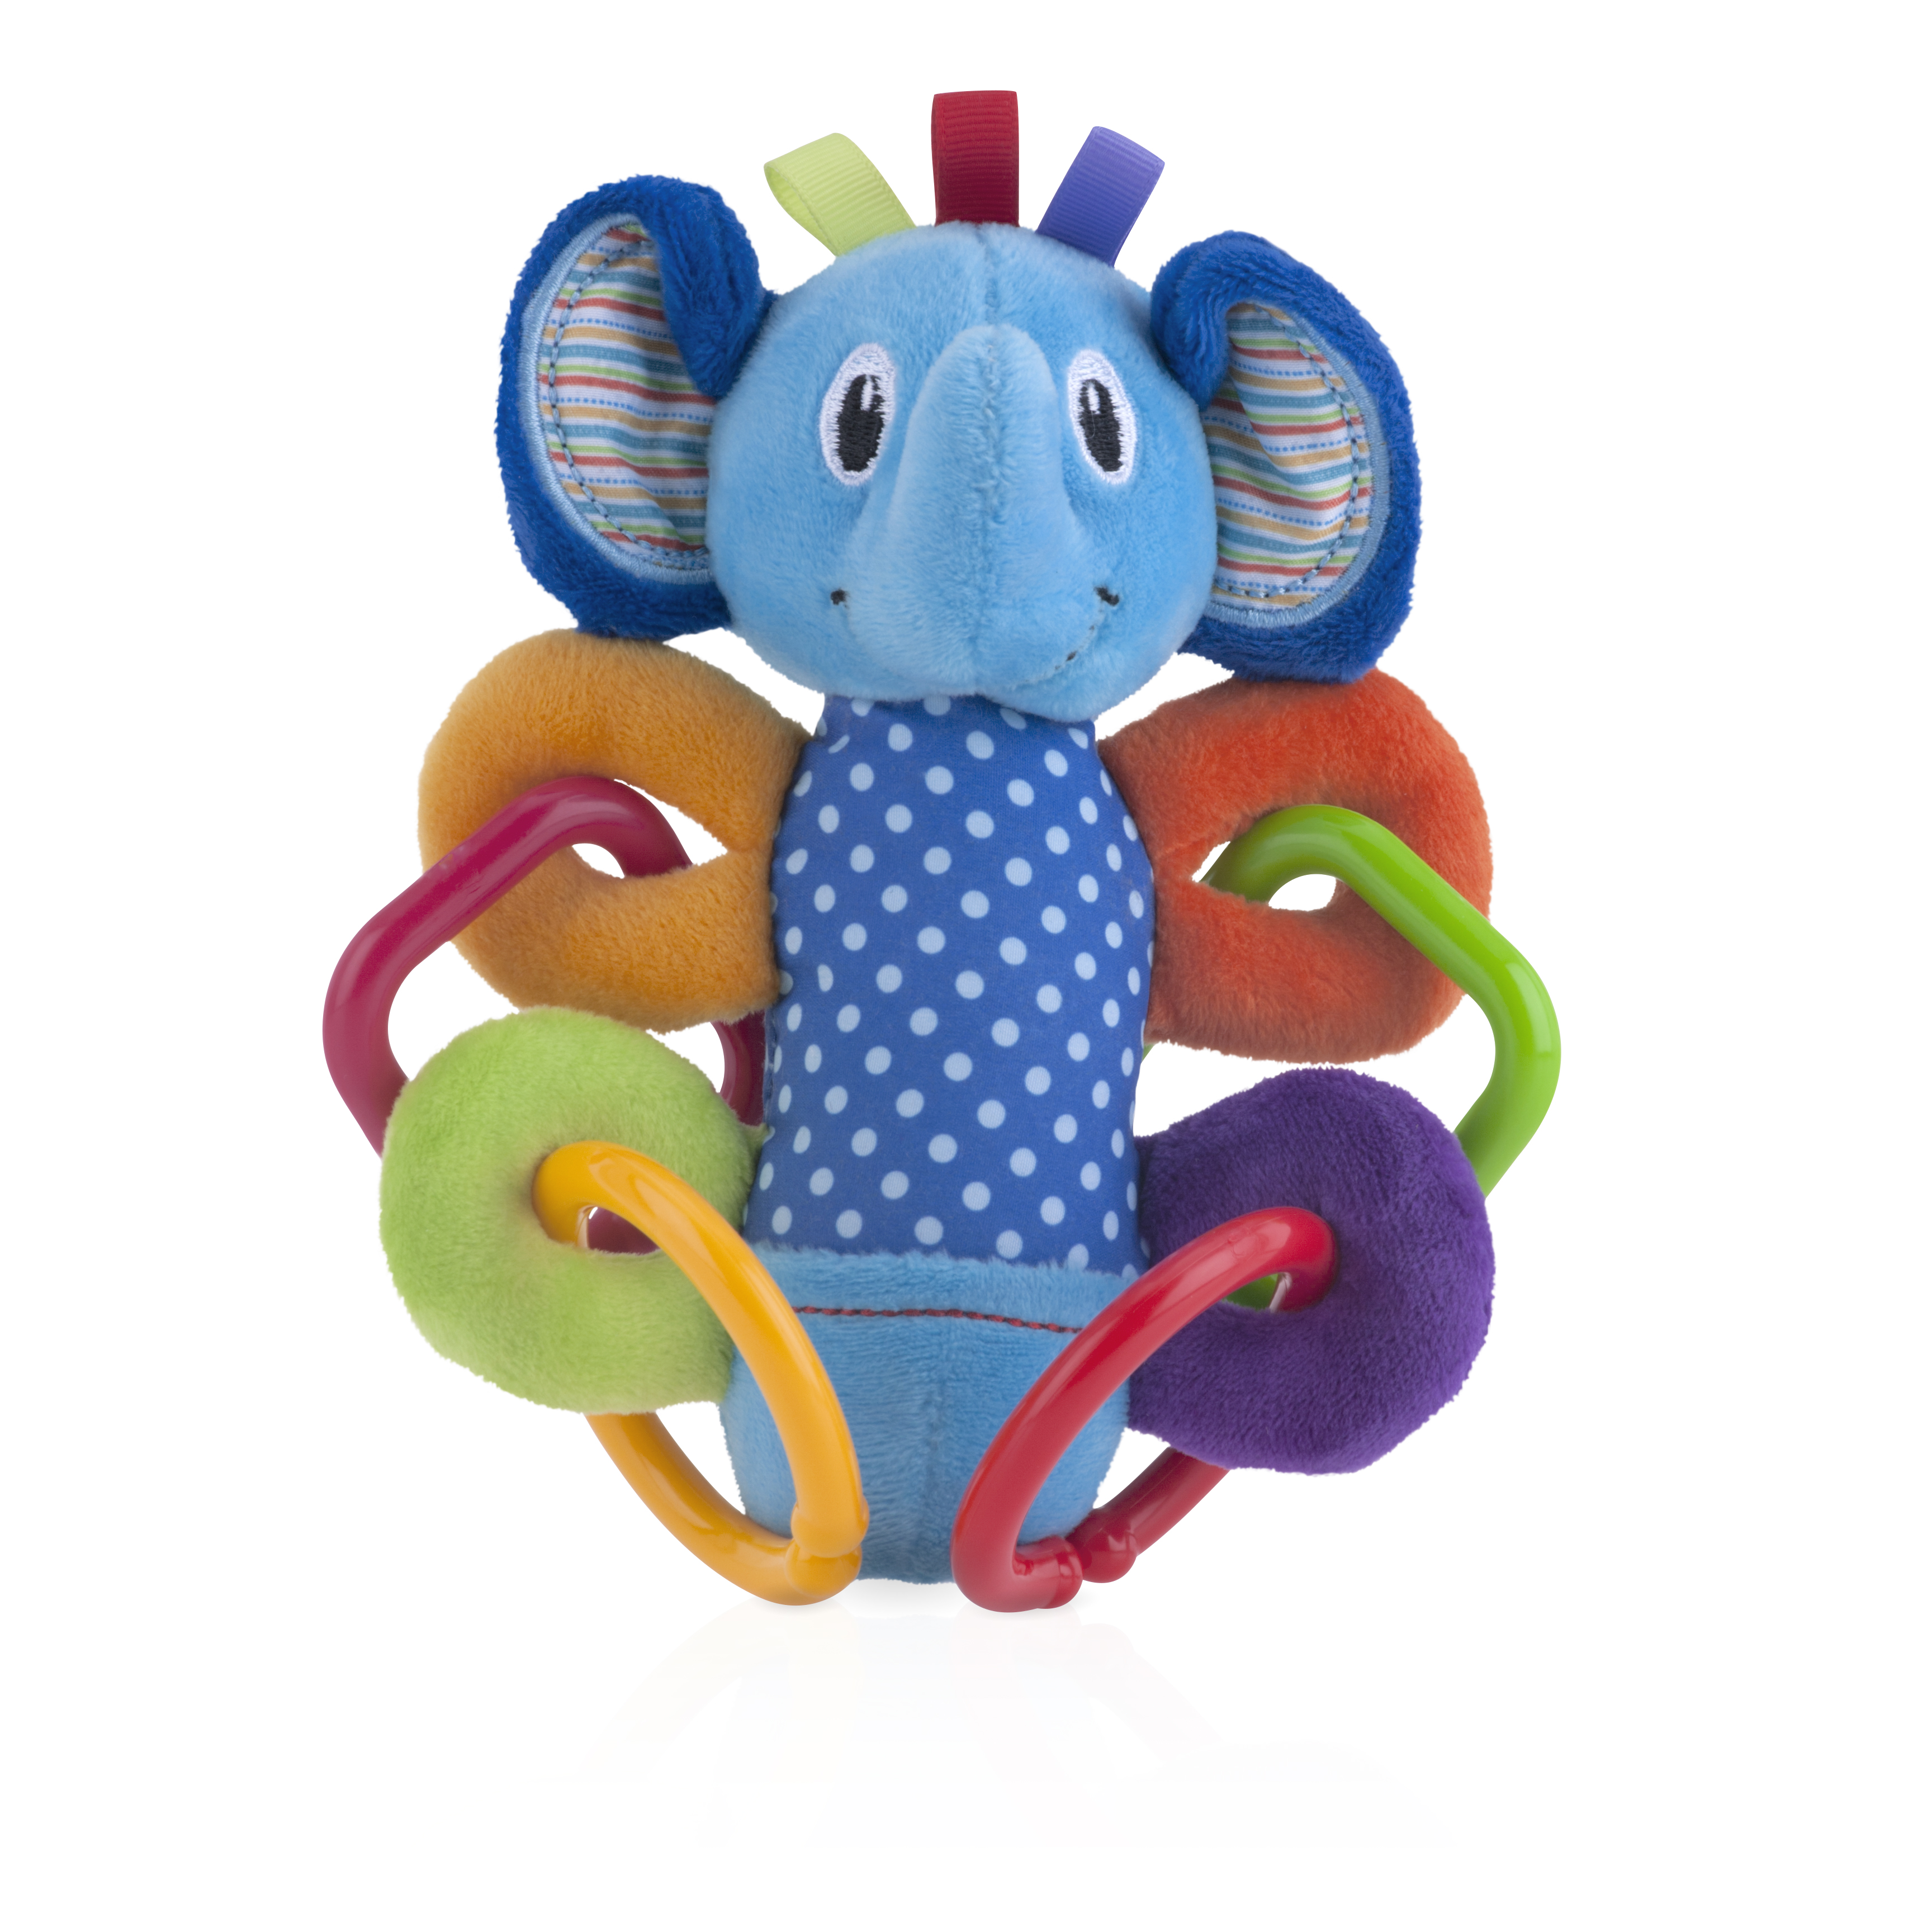 Nuby Squeeze N' Squeak, Styles May Vary - image 4 of 7